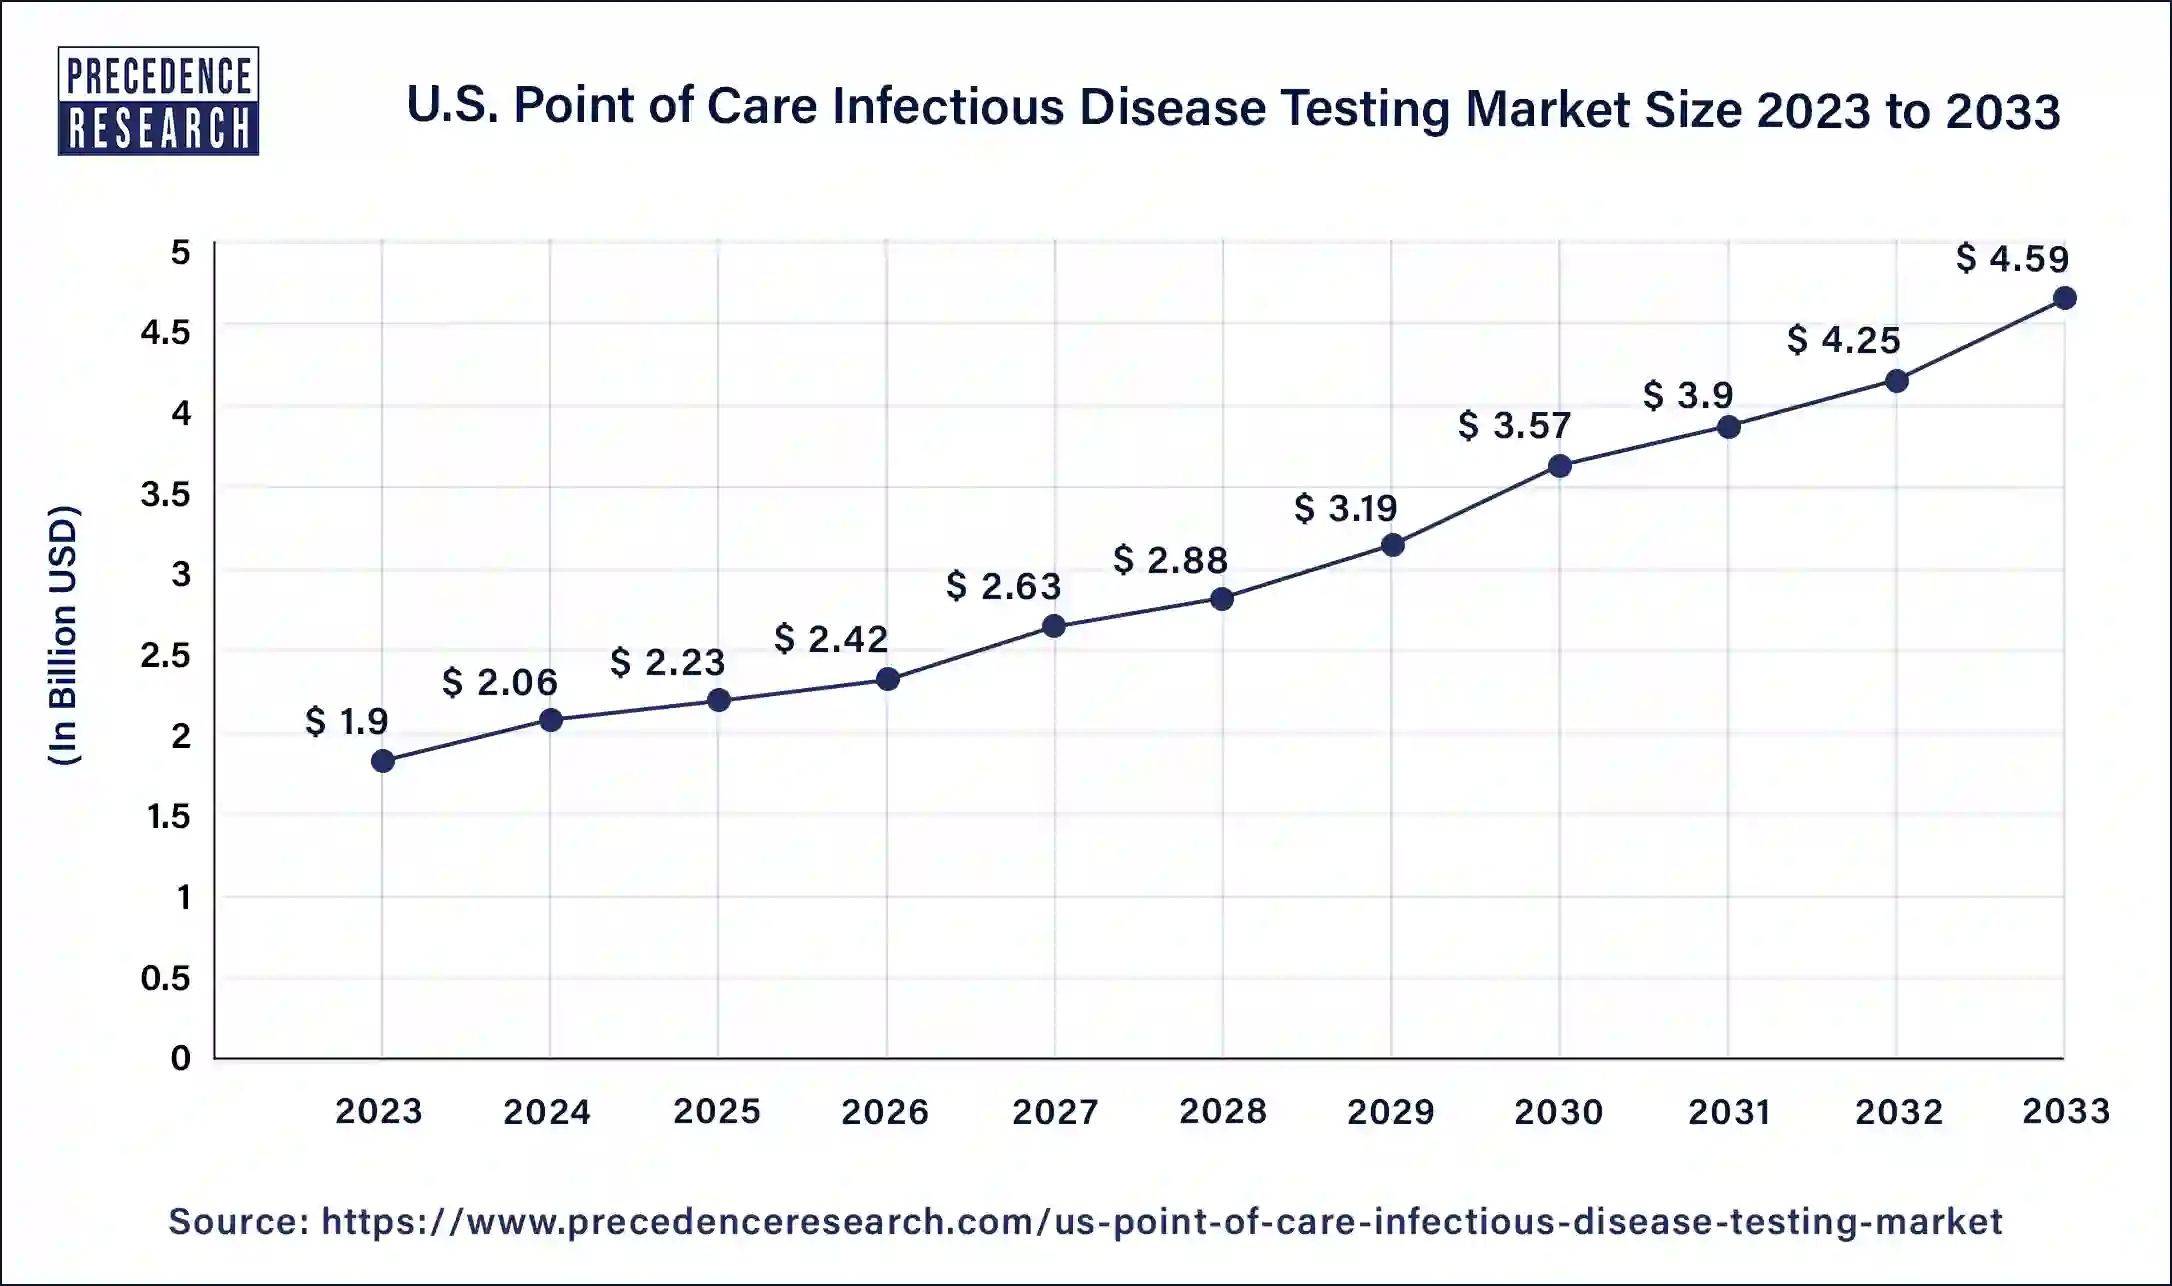 U.S. Point of Care Infectious Disease Testing Market Size 2024 to 2033